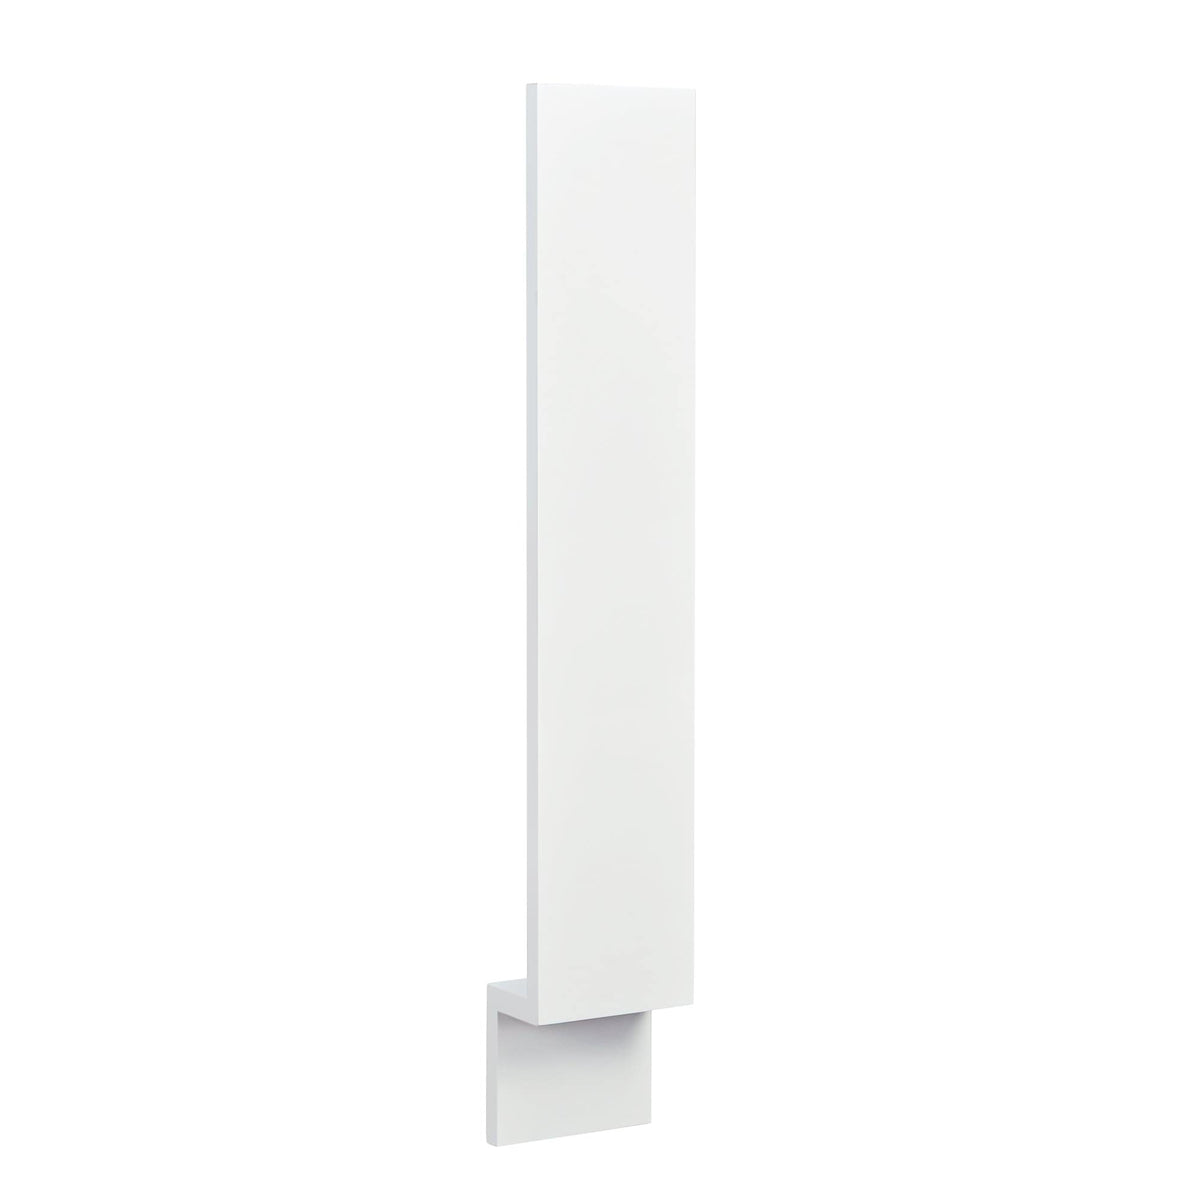 Accessories White Shaker Base Cabinet Filler Trim Pieces WSBF3 Inset Kitchen Cabinets